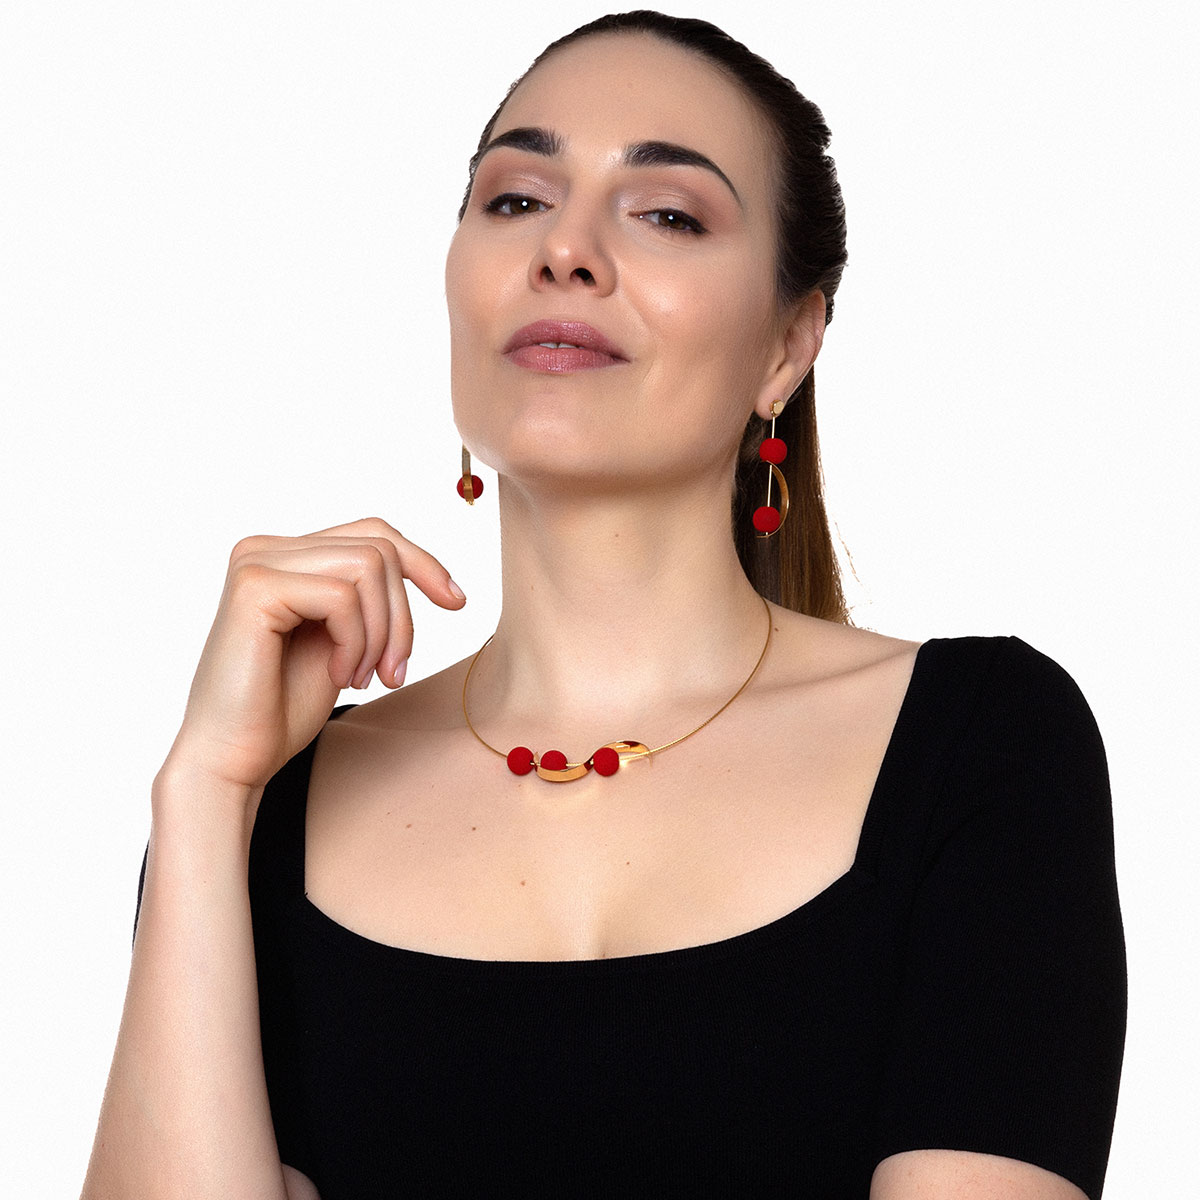 Handmade Sia necklace in 9k or 18k gold and red lava designed by Belen Bajo m1